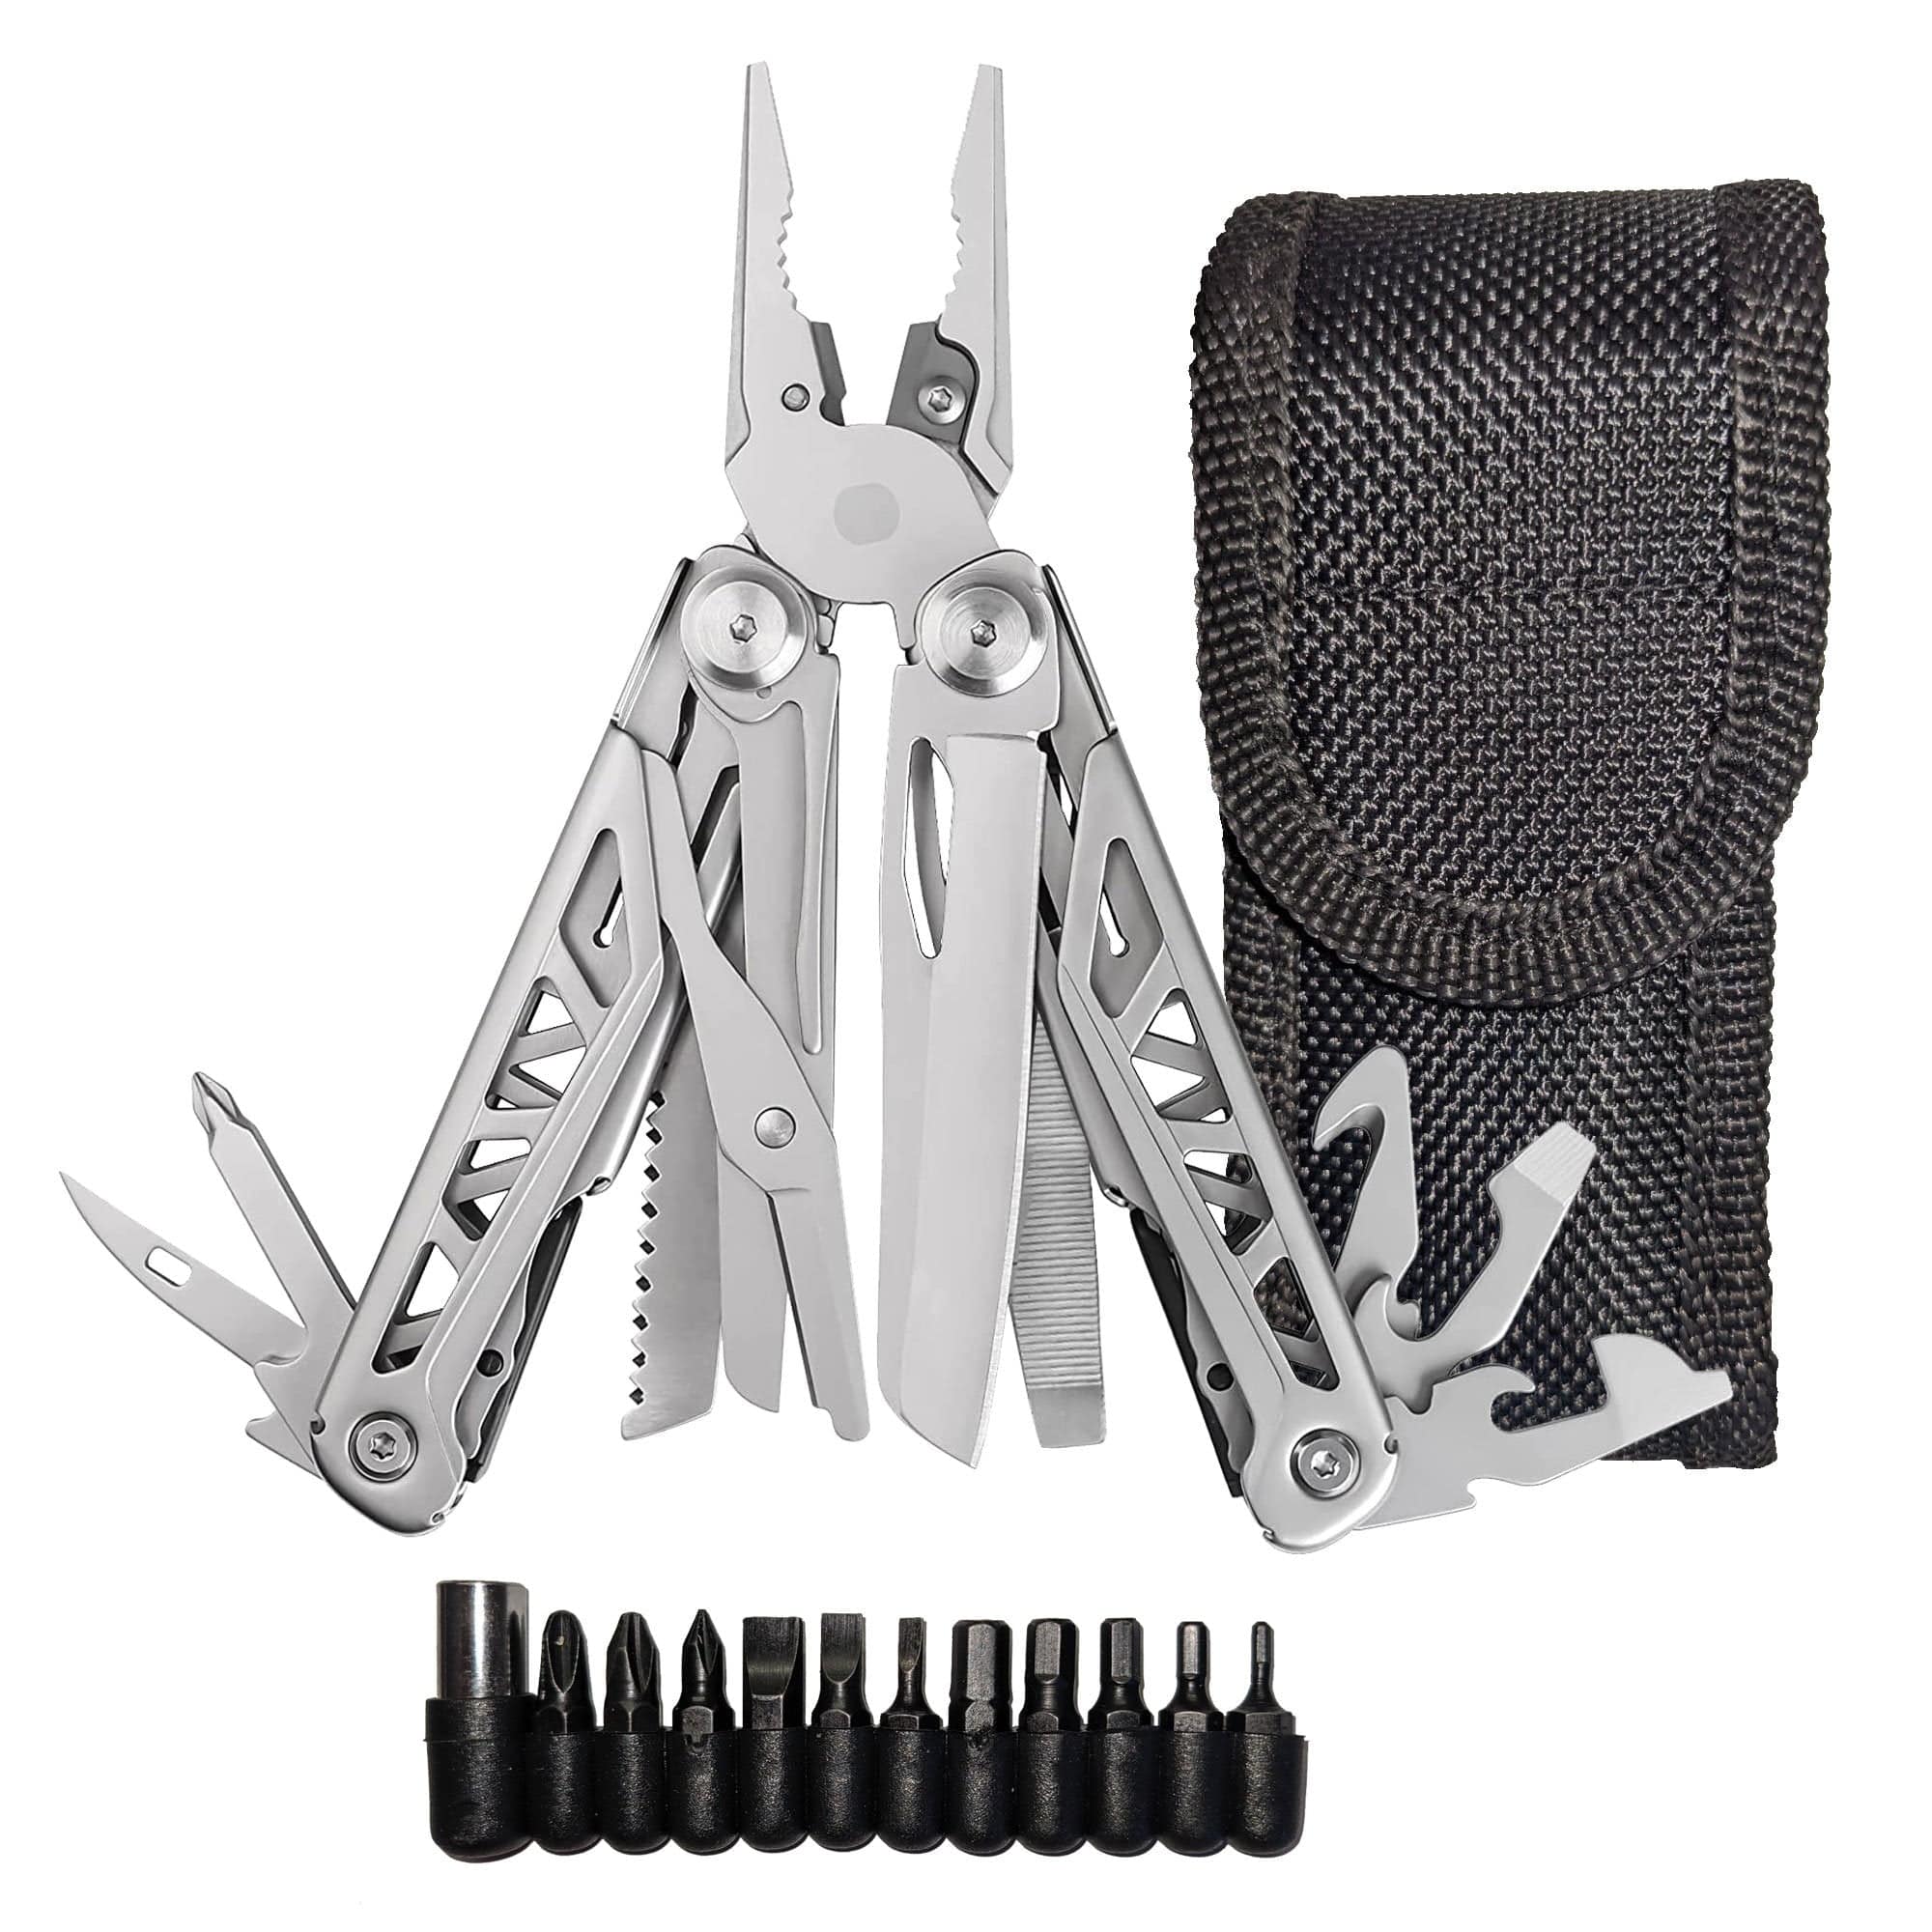 The Perfect Heavy Duty Multitool for Emergencies, Outdoors, Survival, Camping, Hiking - Military Grade Stainless Steel -  ACTION™ Multitool